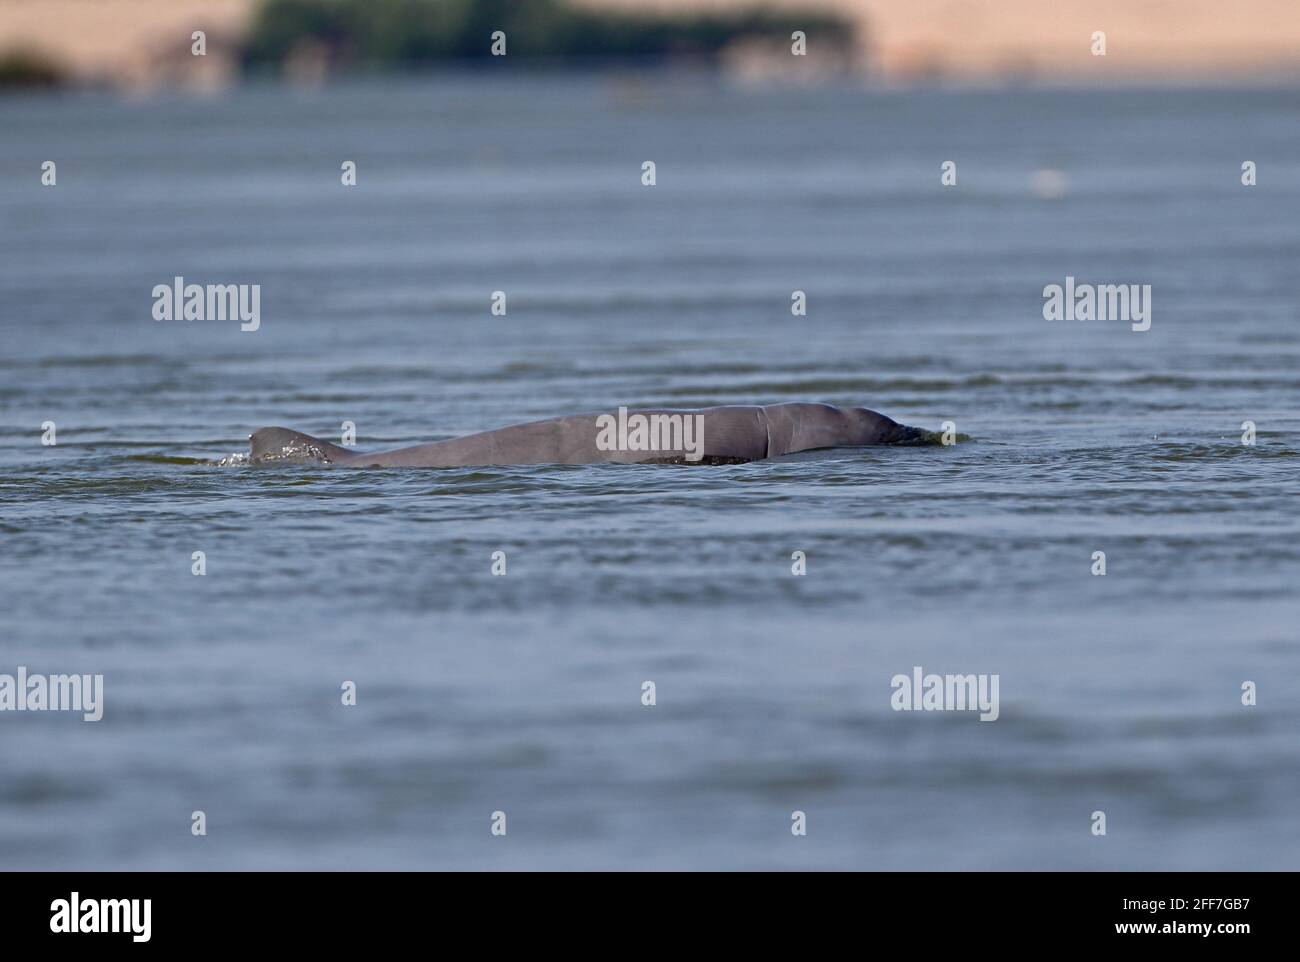 Irrawaddy Dolphin (Orcaella brevirostris) adult at surface Mekong River, Kratie, Cambodia              January Stock Photo